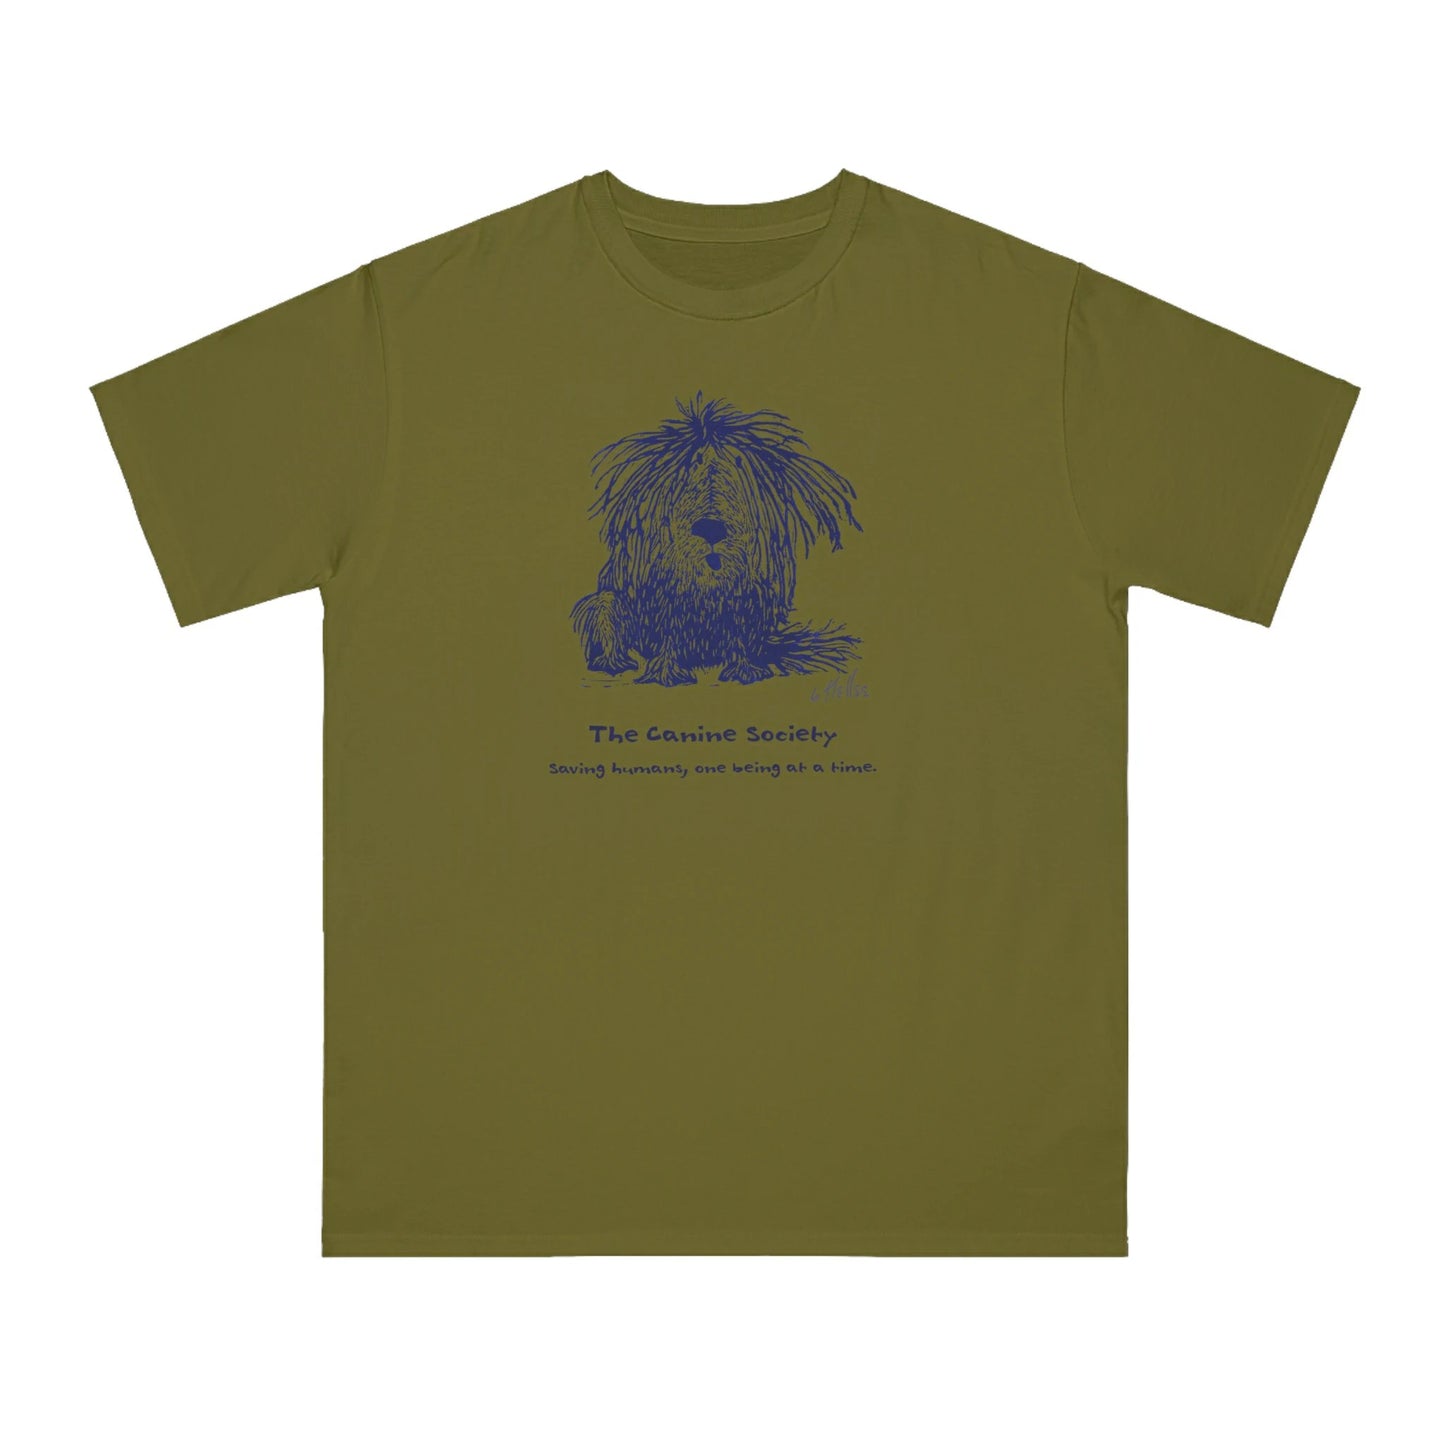 A Shaggy Dog sits on an olive color unisex men's t-shirt. Text below reads: 'Canine Society Saving Humans One Being at a Time.'